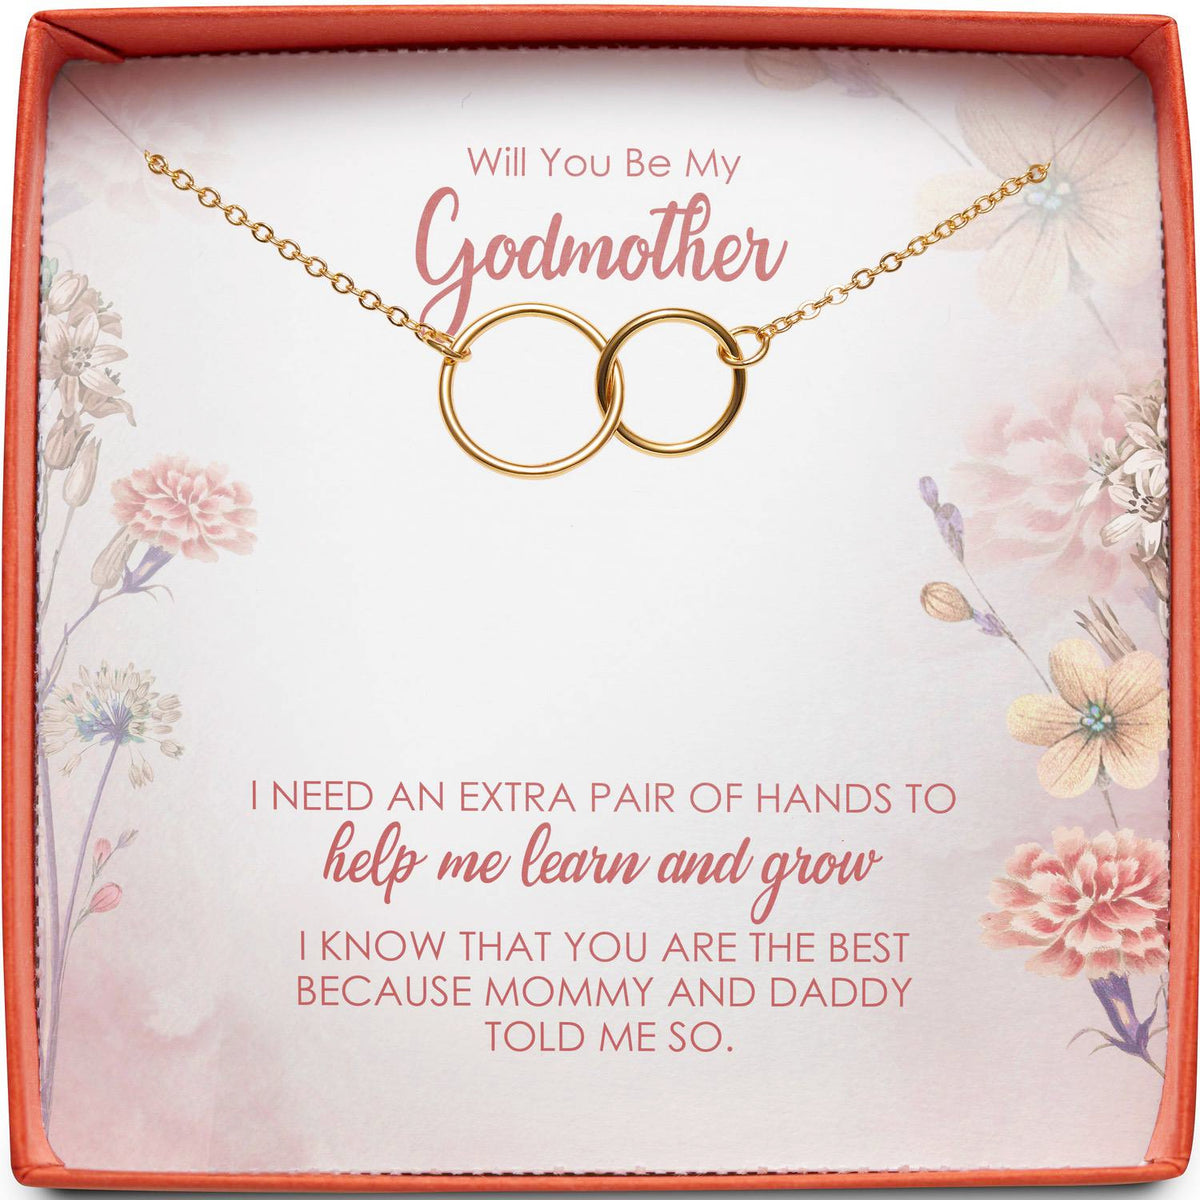 Will You Be My Godmother? | Extra Pair of Hands | Interlocking Circles